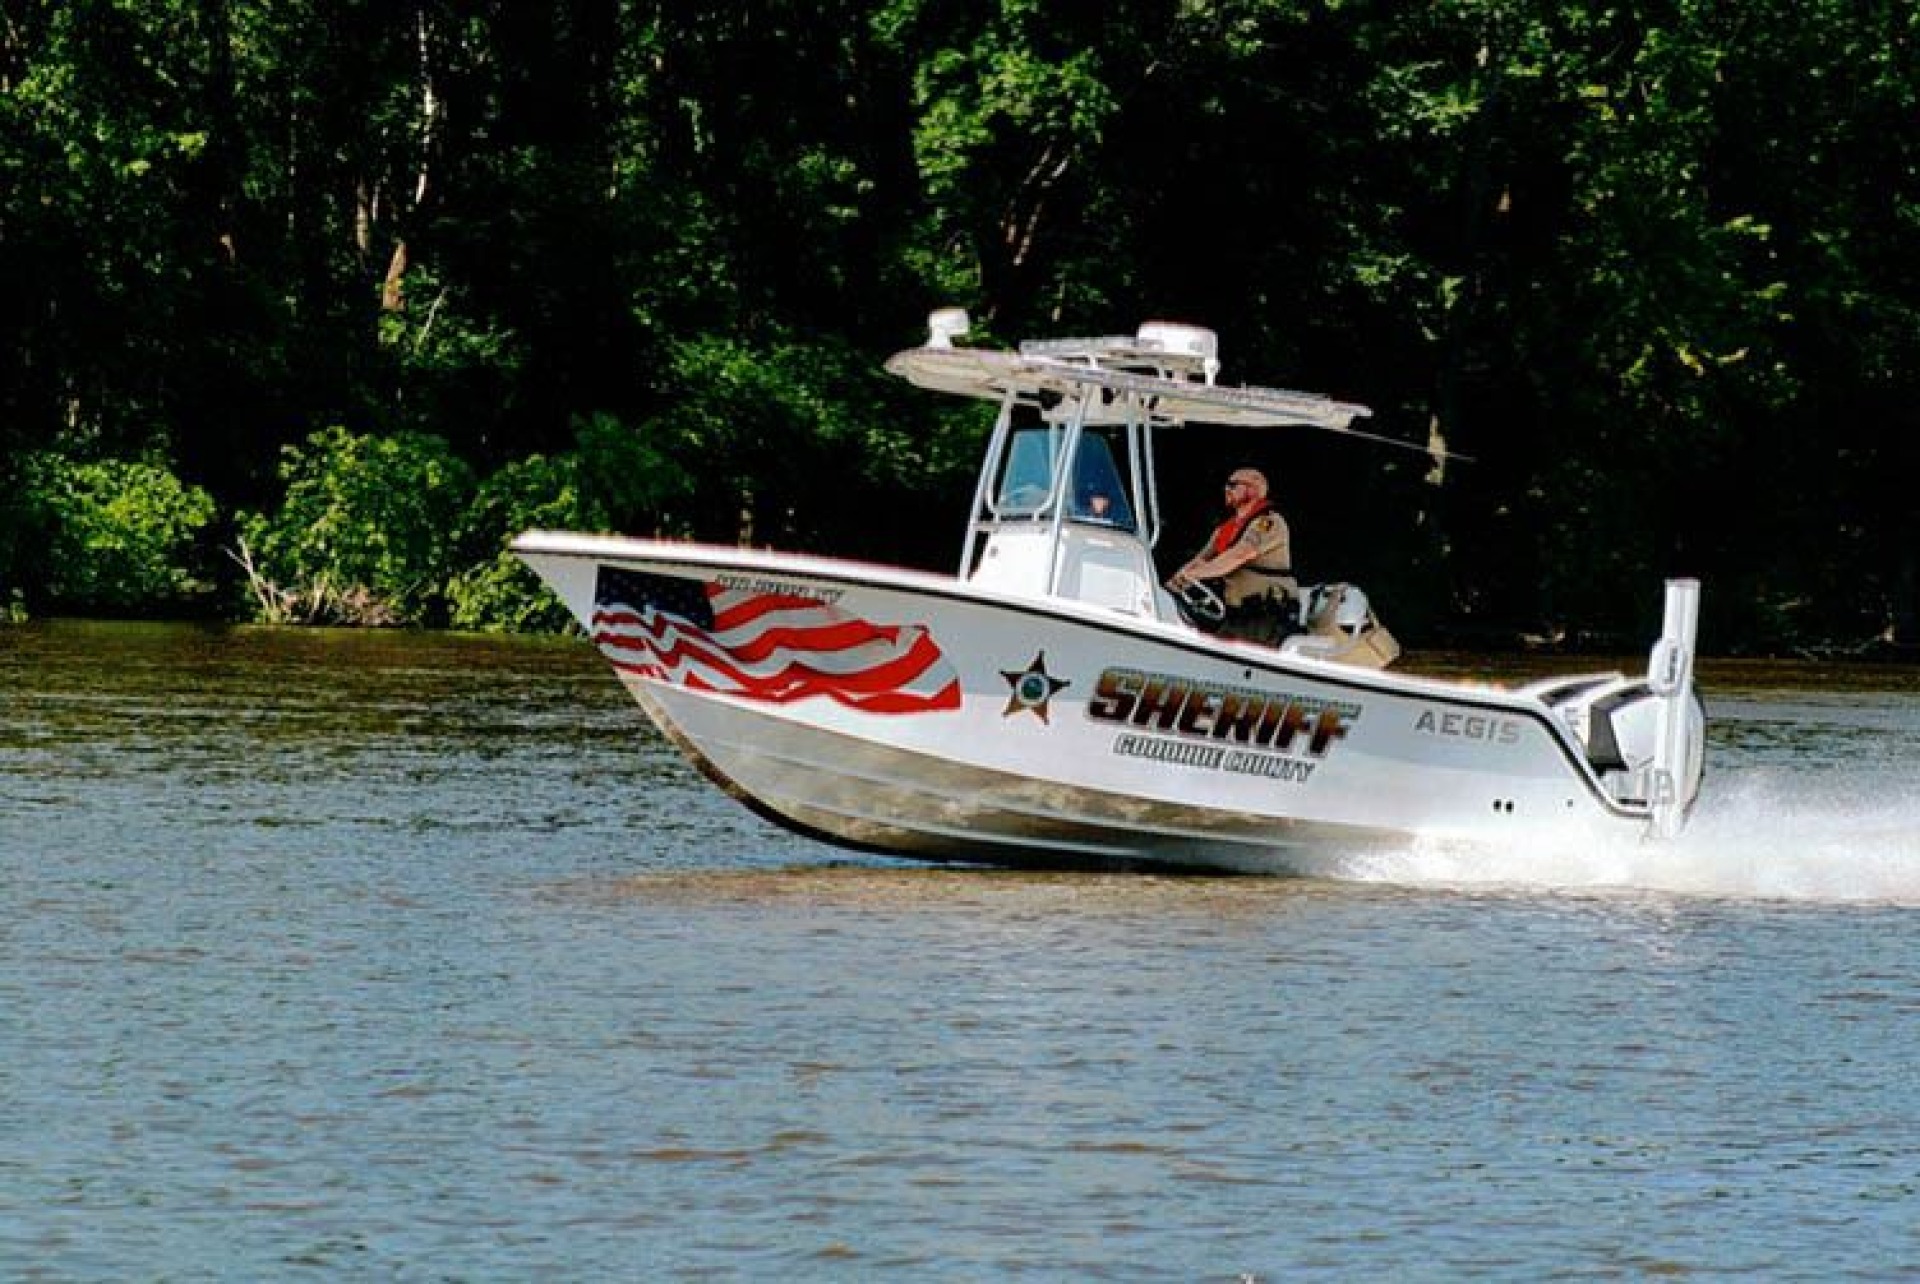 An officer patrolling the county waterway on their water patrol vehicle.